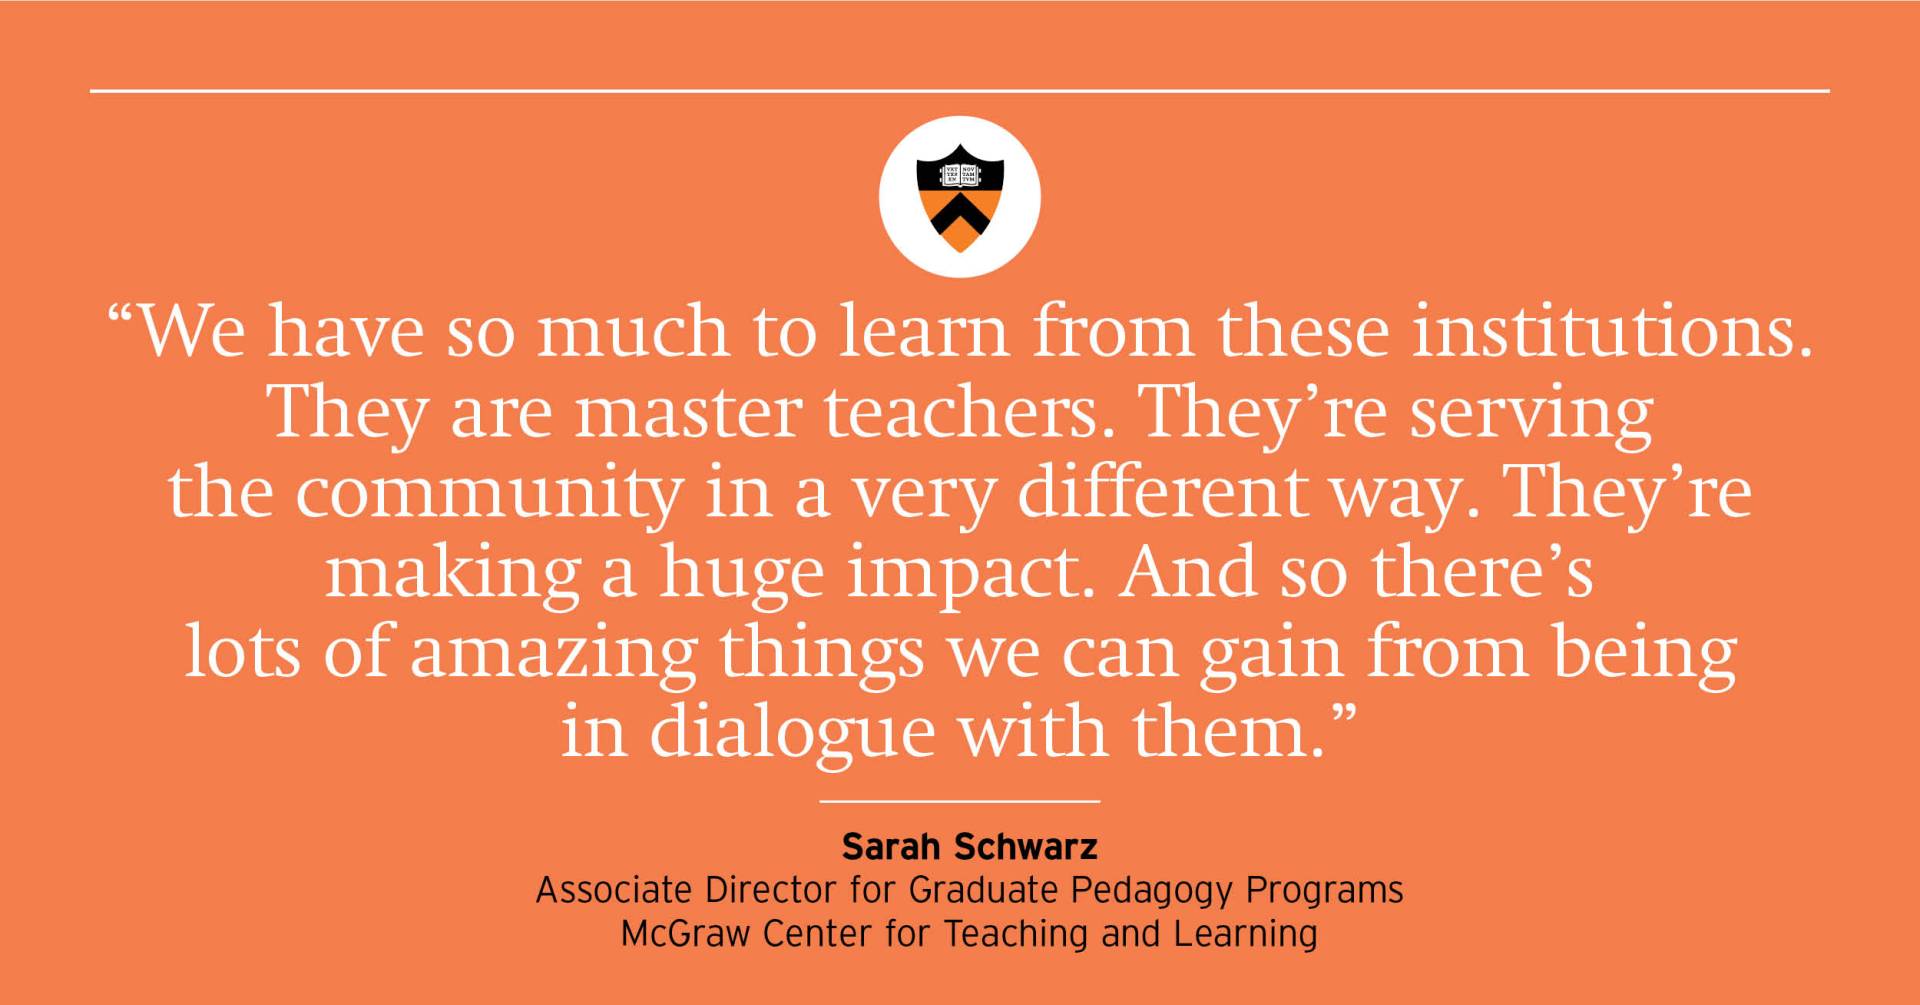 “We have so much to learn from these institutions. They are master teachers. They’re serving the community in a very different way. They’re making a huge impact. And so there’s lots of amazing things we can gain from being in dialogue with them.” — Sarah Schwarz, associate director for graduate pedagogy programs, McGraw Center for Teaching and Learning